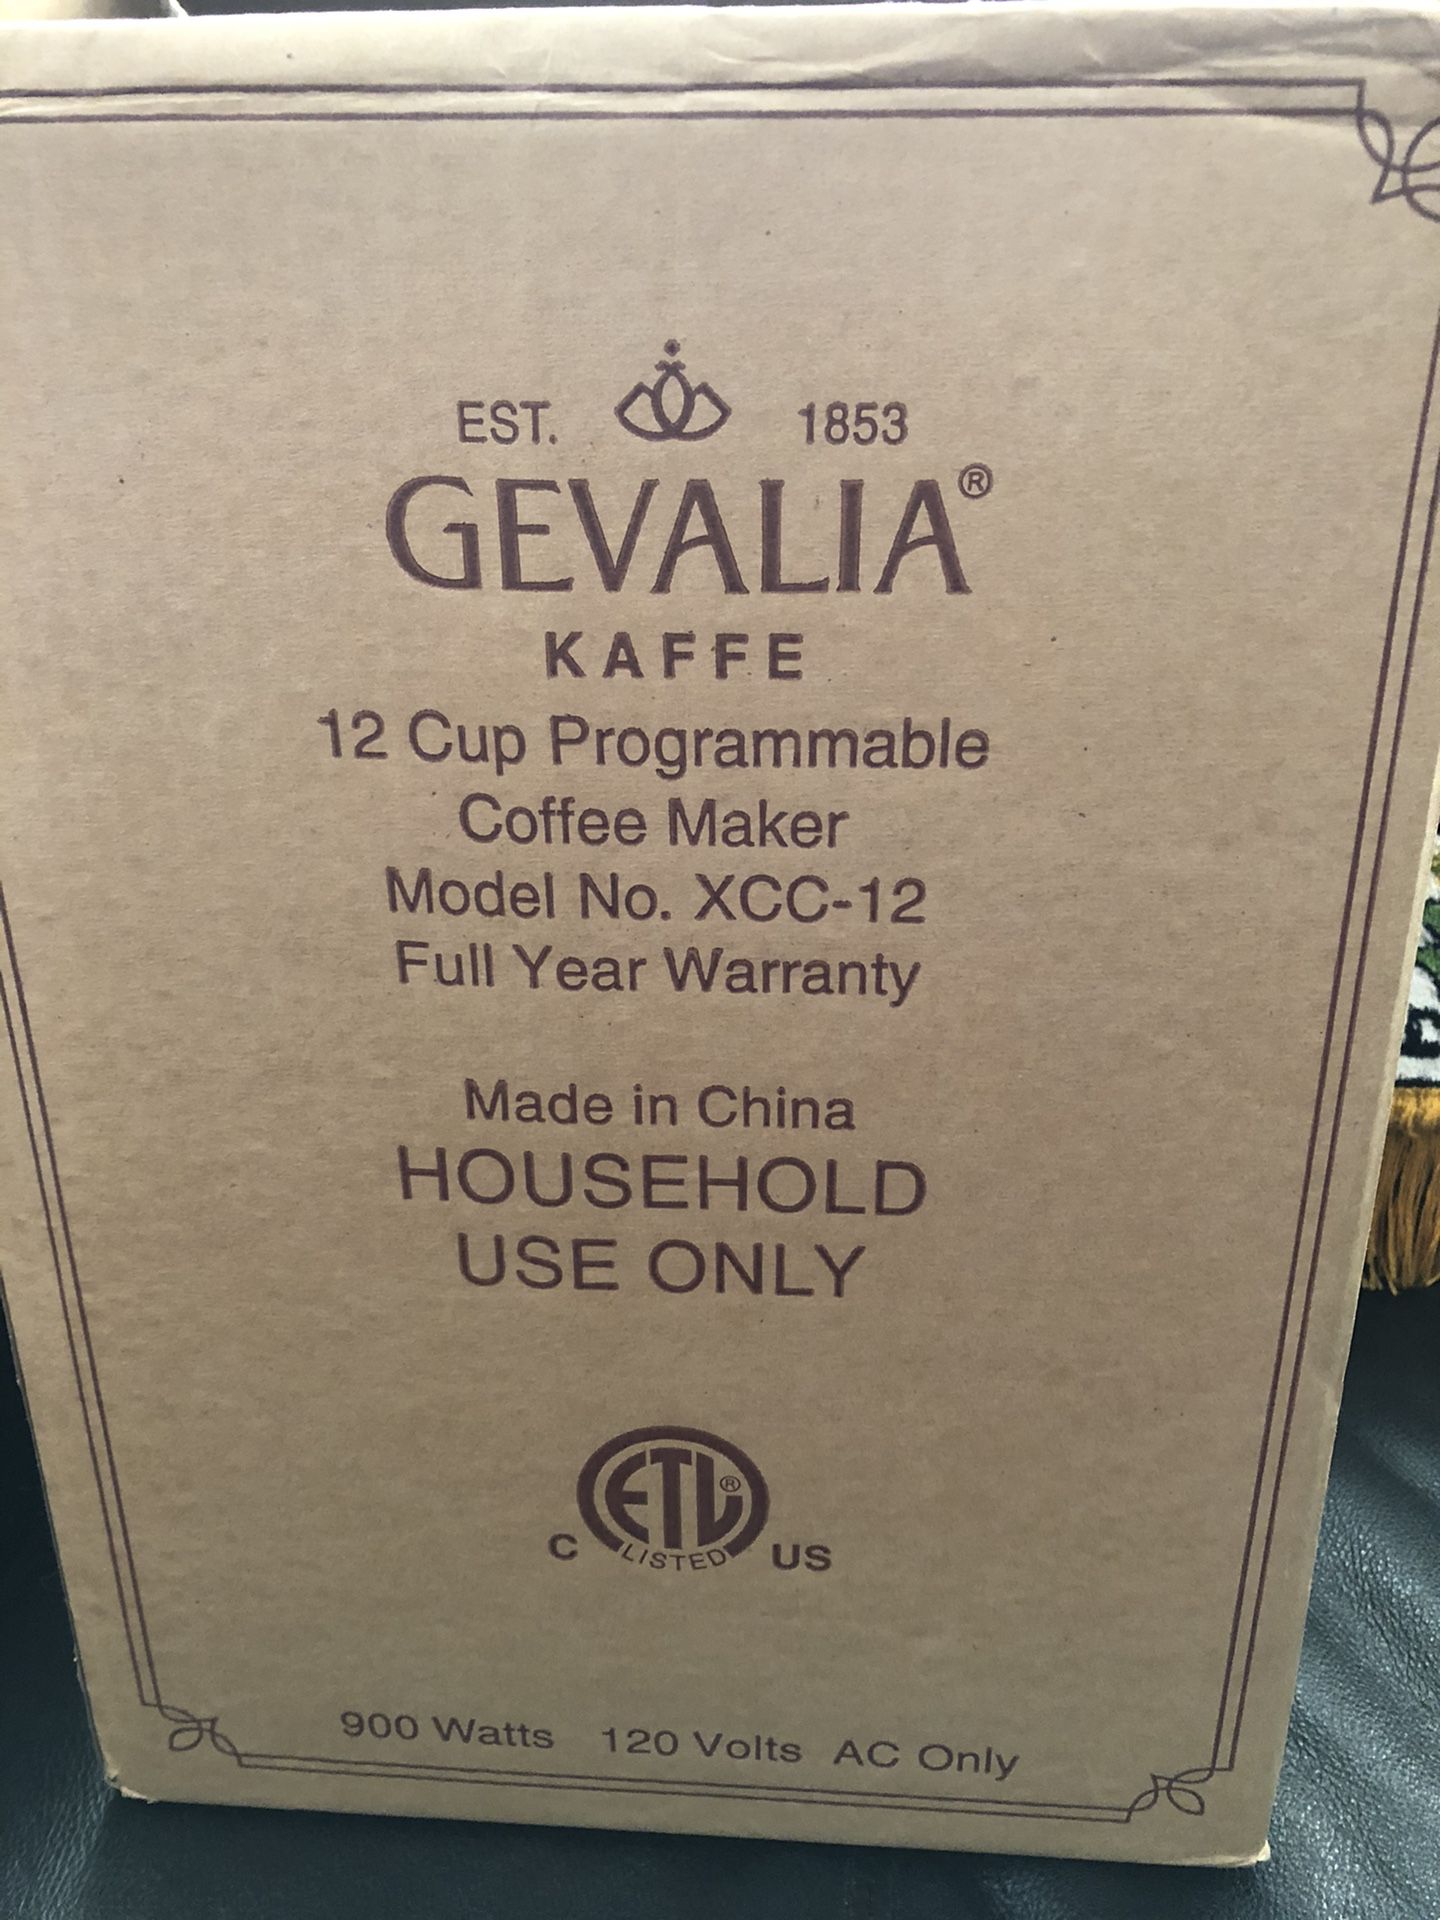 Gevalia. Call {contact info removed}